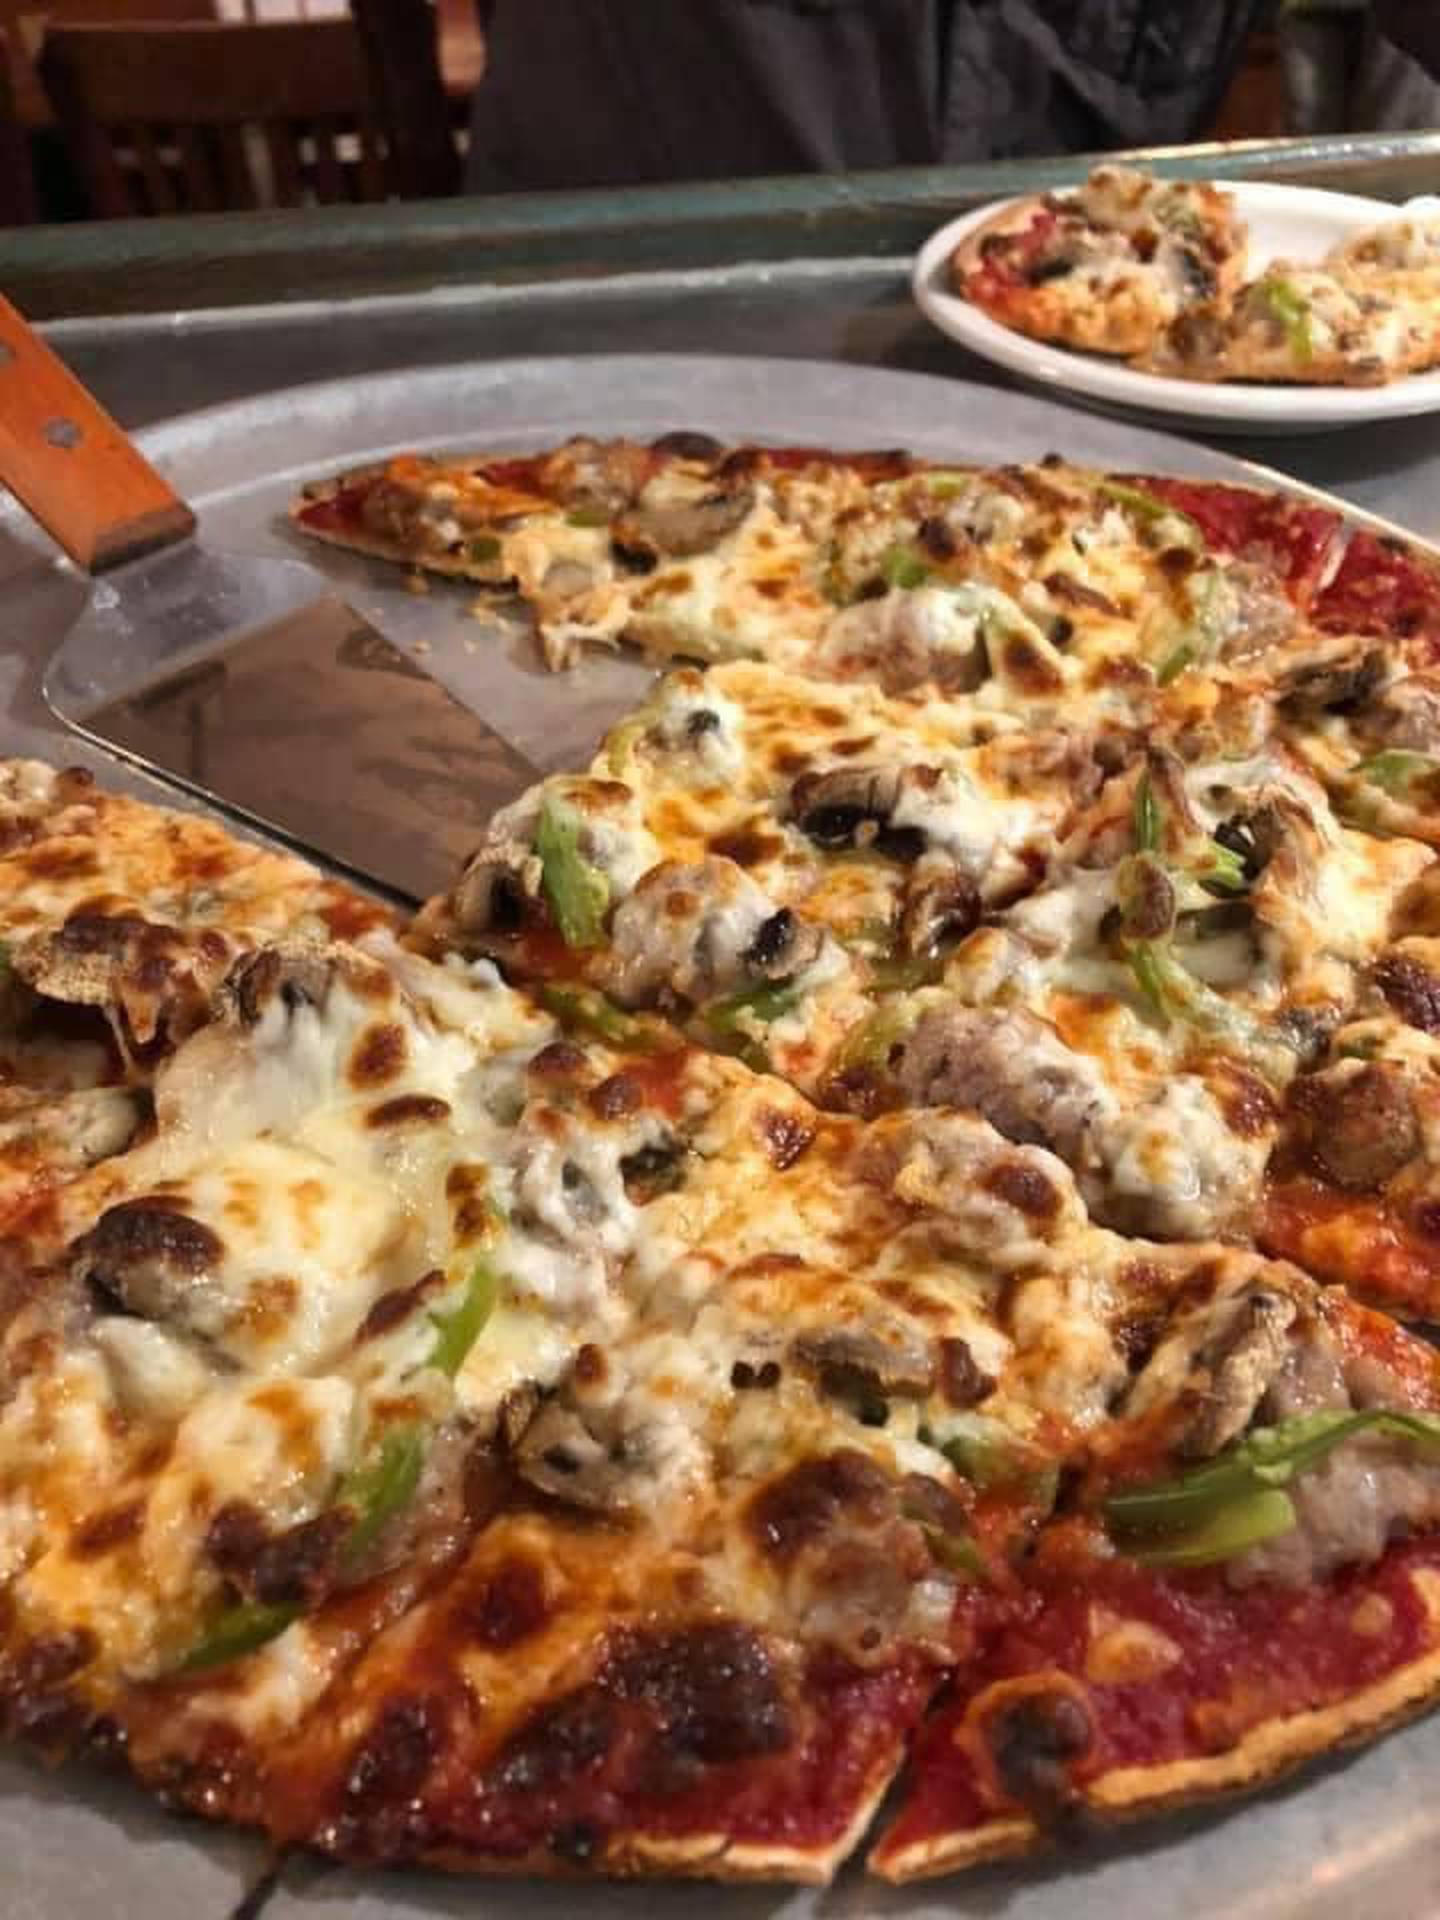 Every Buddies Pub and Grub in Gardner was voted in the top 10 best pizza places in Grundy County by our readers in 2021. (Photo from Every Buddies Pub and Grub Facebook page)